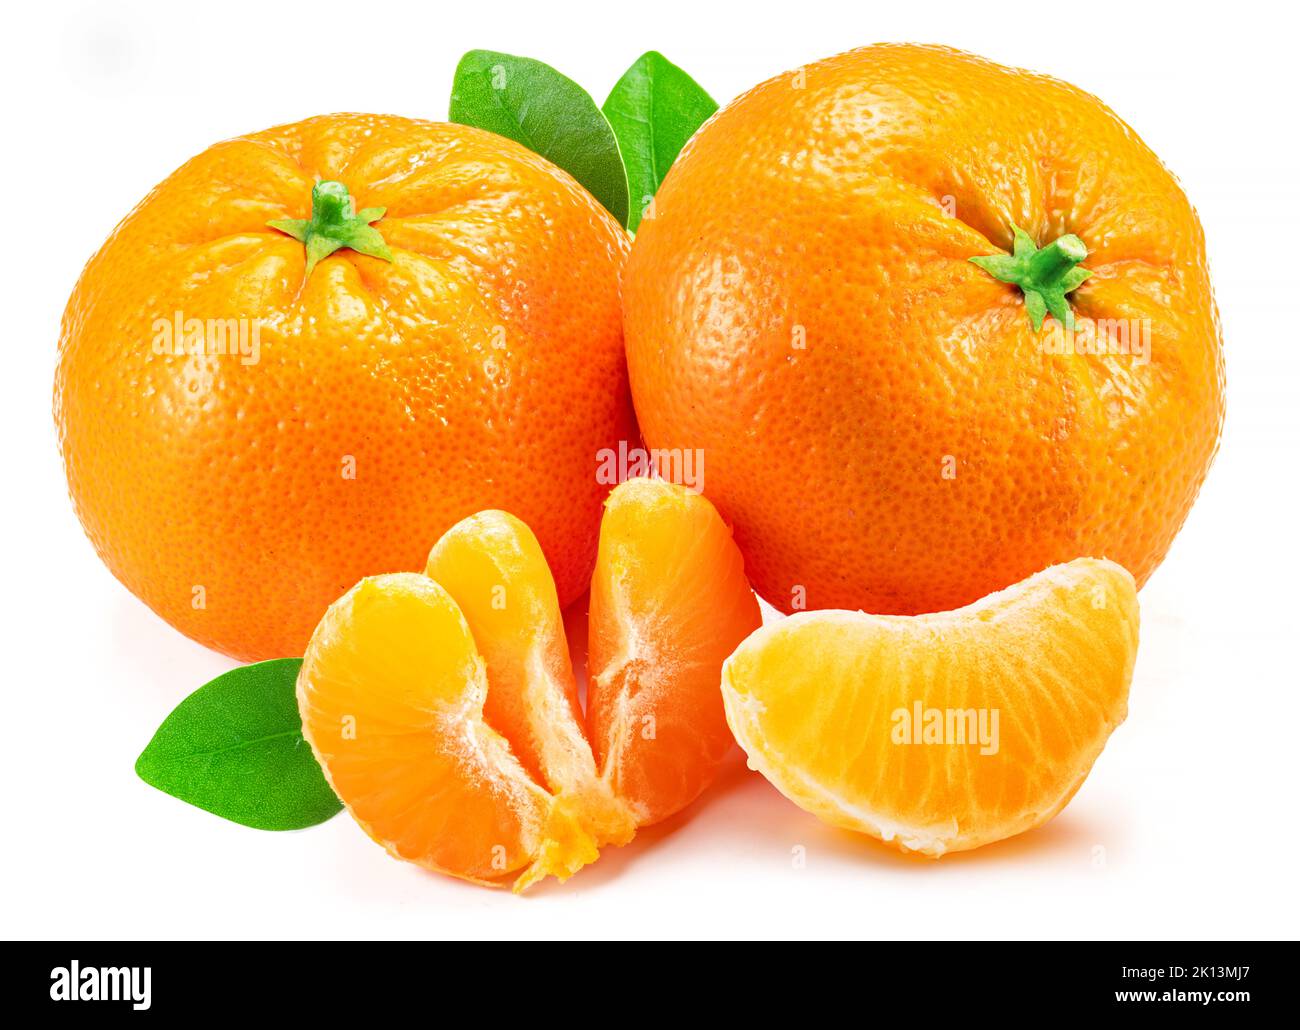 Ripe tangerine fruits with leaf and mandarin slices on white background. Stock Photo